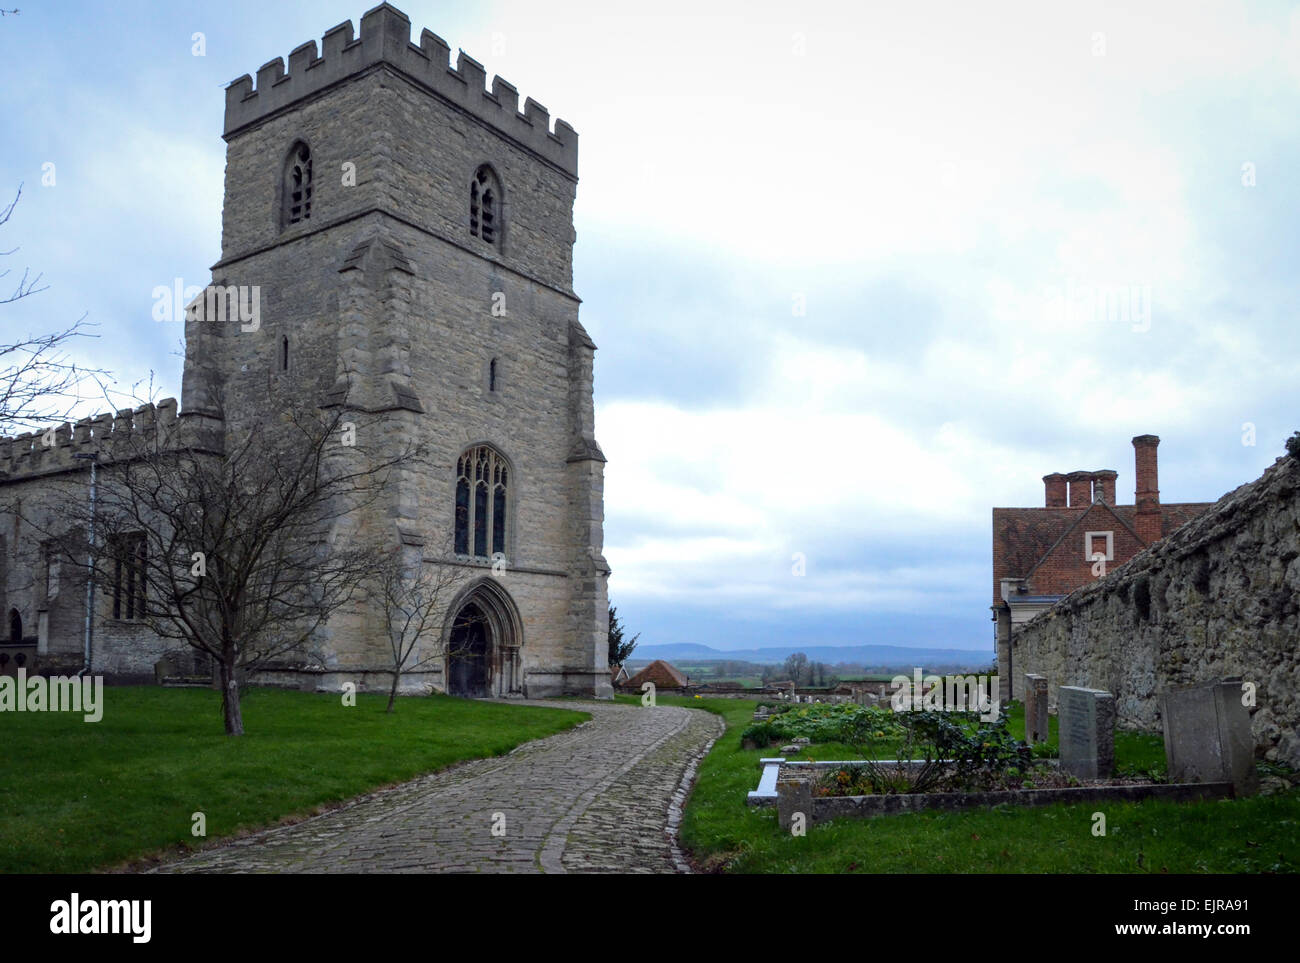 The Parish Church of SS Peter and Paul in Dinton, Vale of Aylesbury, Buckinghamshire. Stock Photo